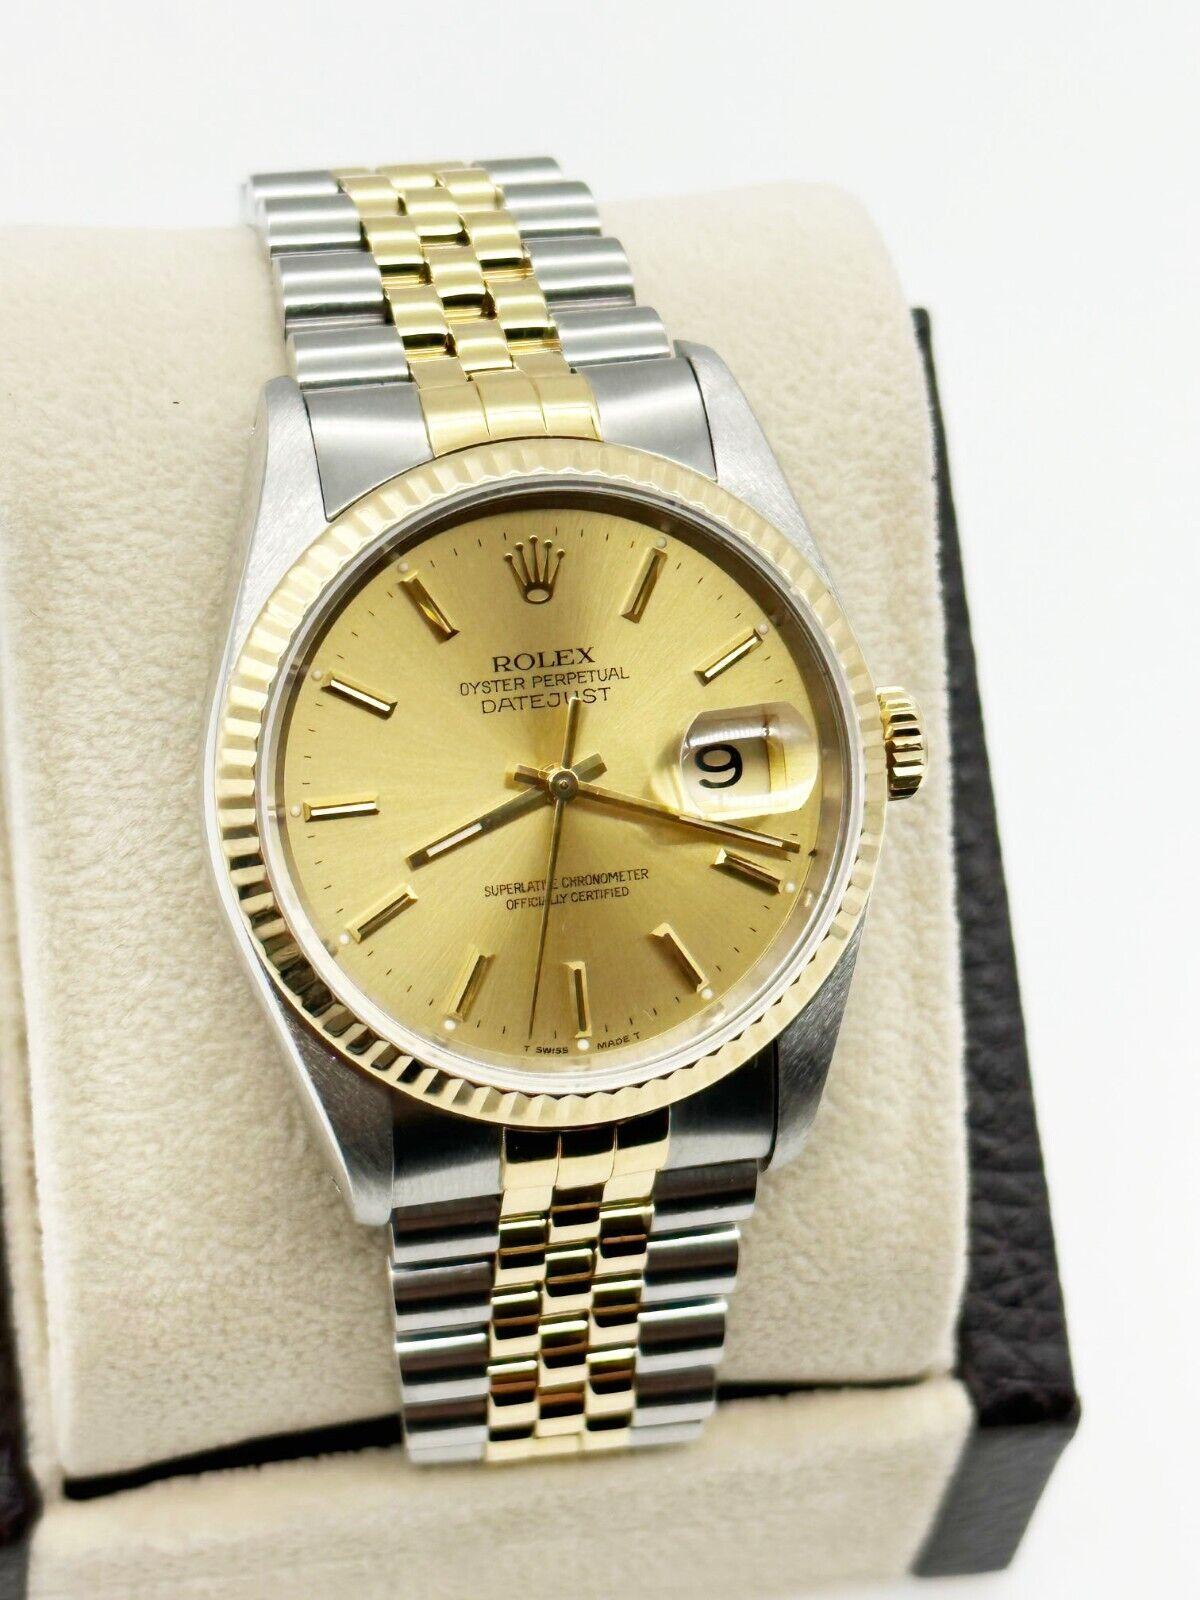 Style Number: 16233

Serial: X503***

Year: 1991

Model: Datejust 

Case Material: Stainless Steel 

Band: 18K Yellow Gold & Stainless Steel 

Bezel: 18K Yellow Gold
 
Dial: Champagne 

Face: Sapphire Crystal 

Case Size: 36mm

Includes: 

-Elegant